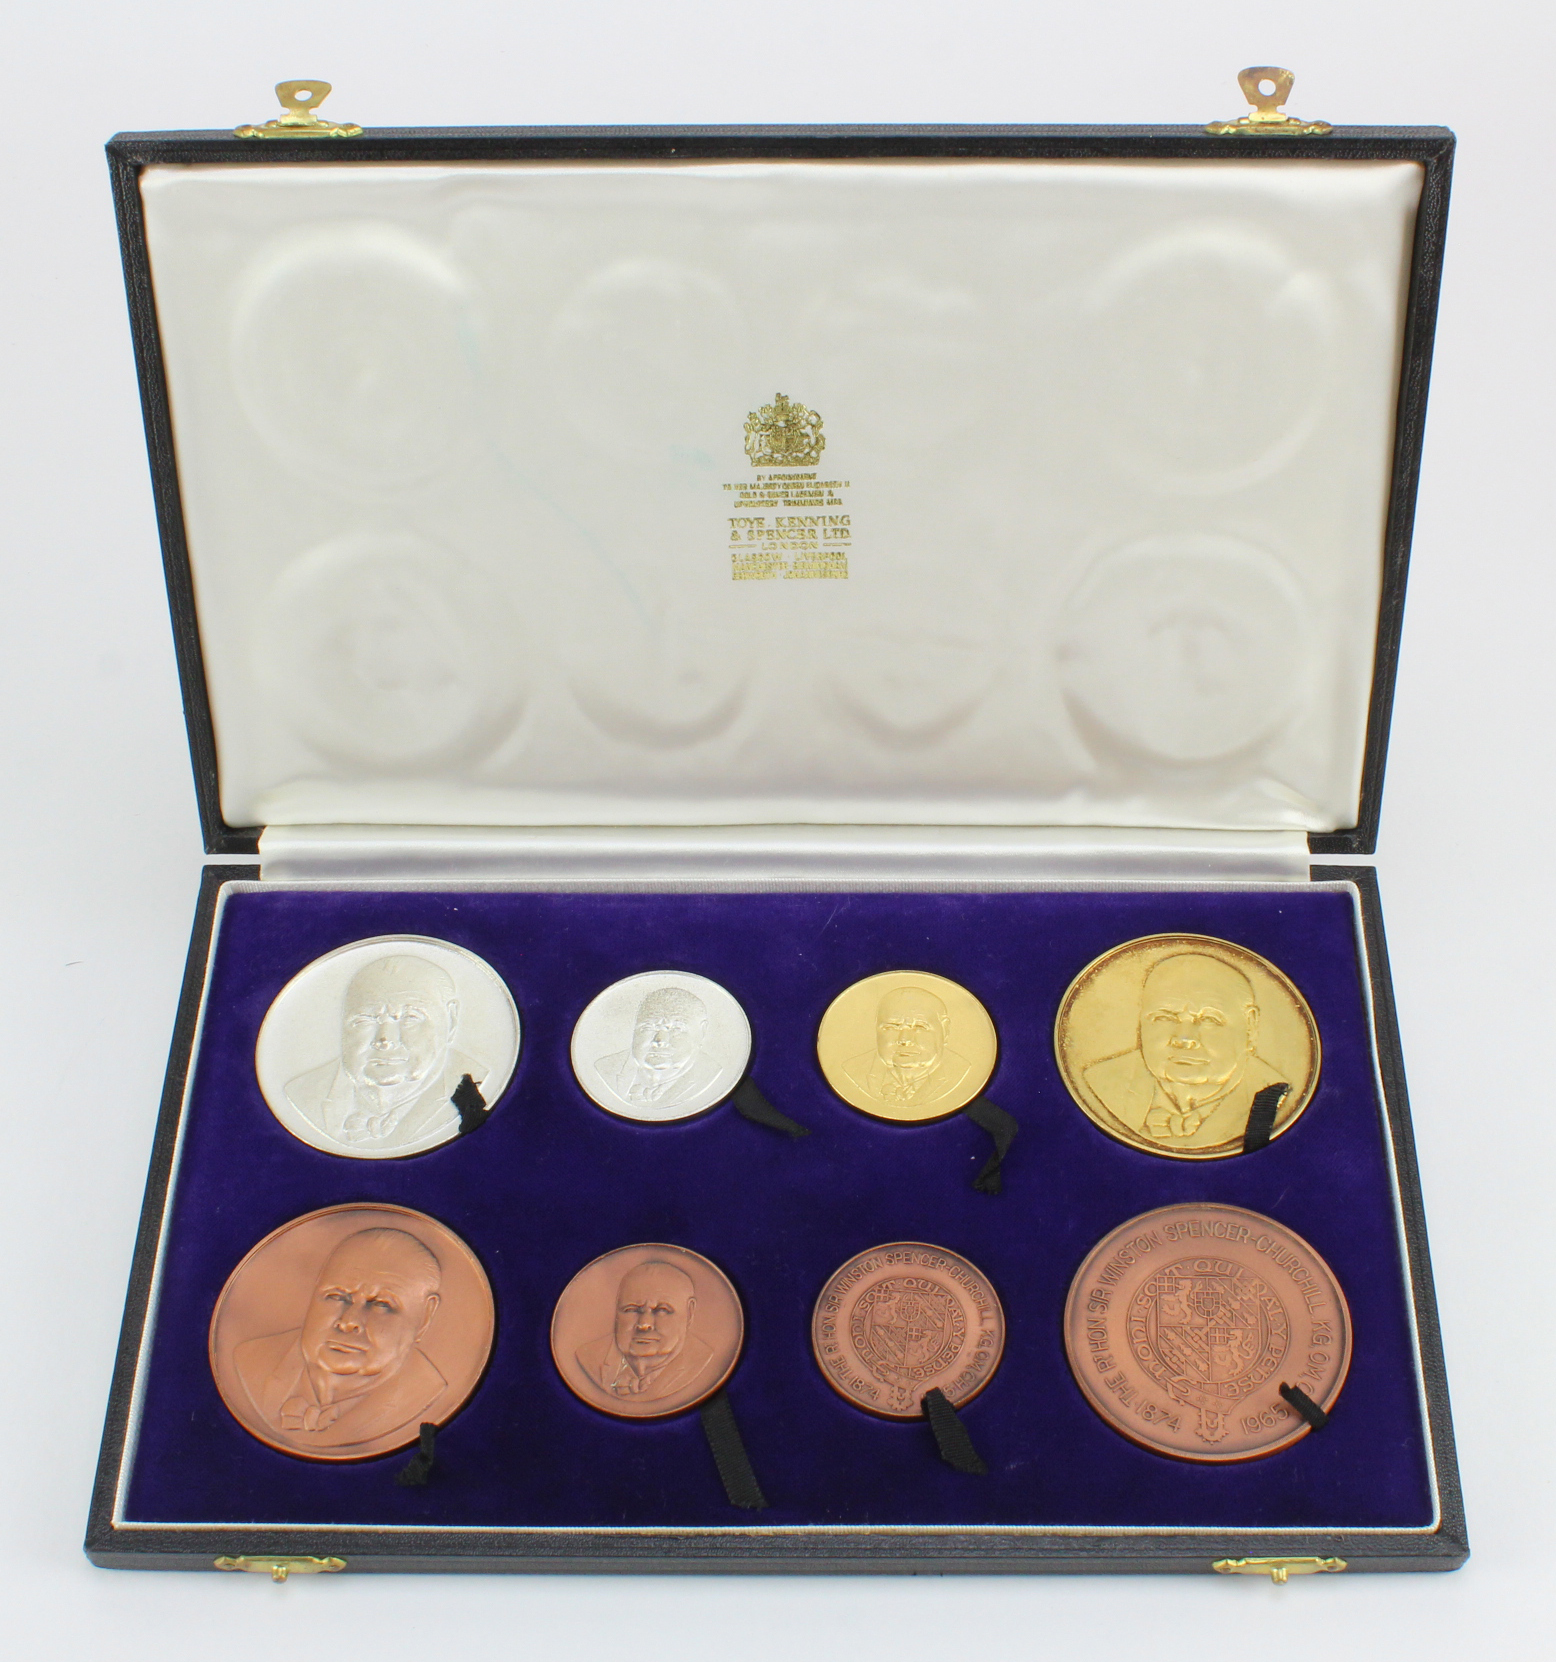 British Commemorative Medals (8): Death of Winston Churchill 1965, deluxe set by Toye, Kenning &